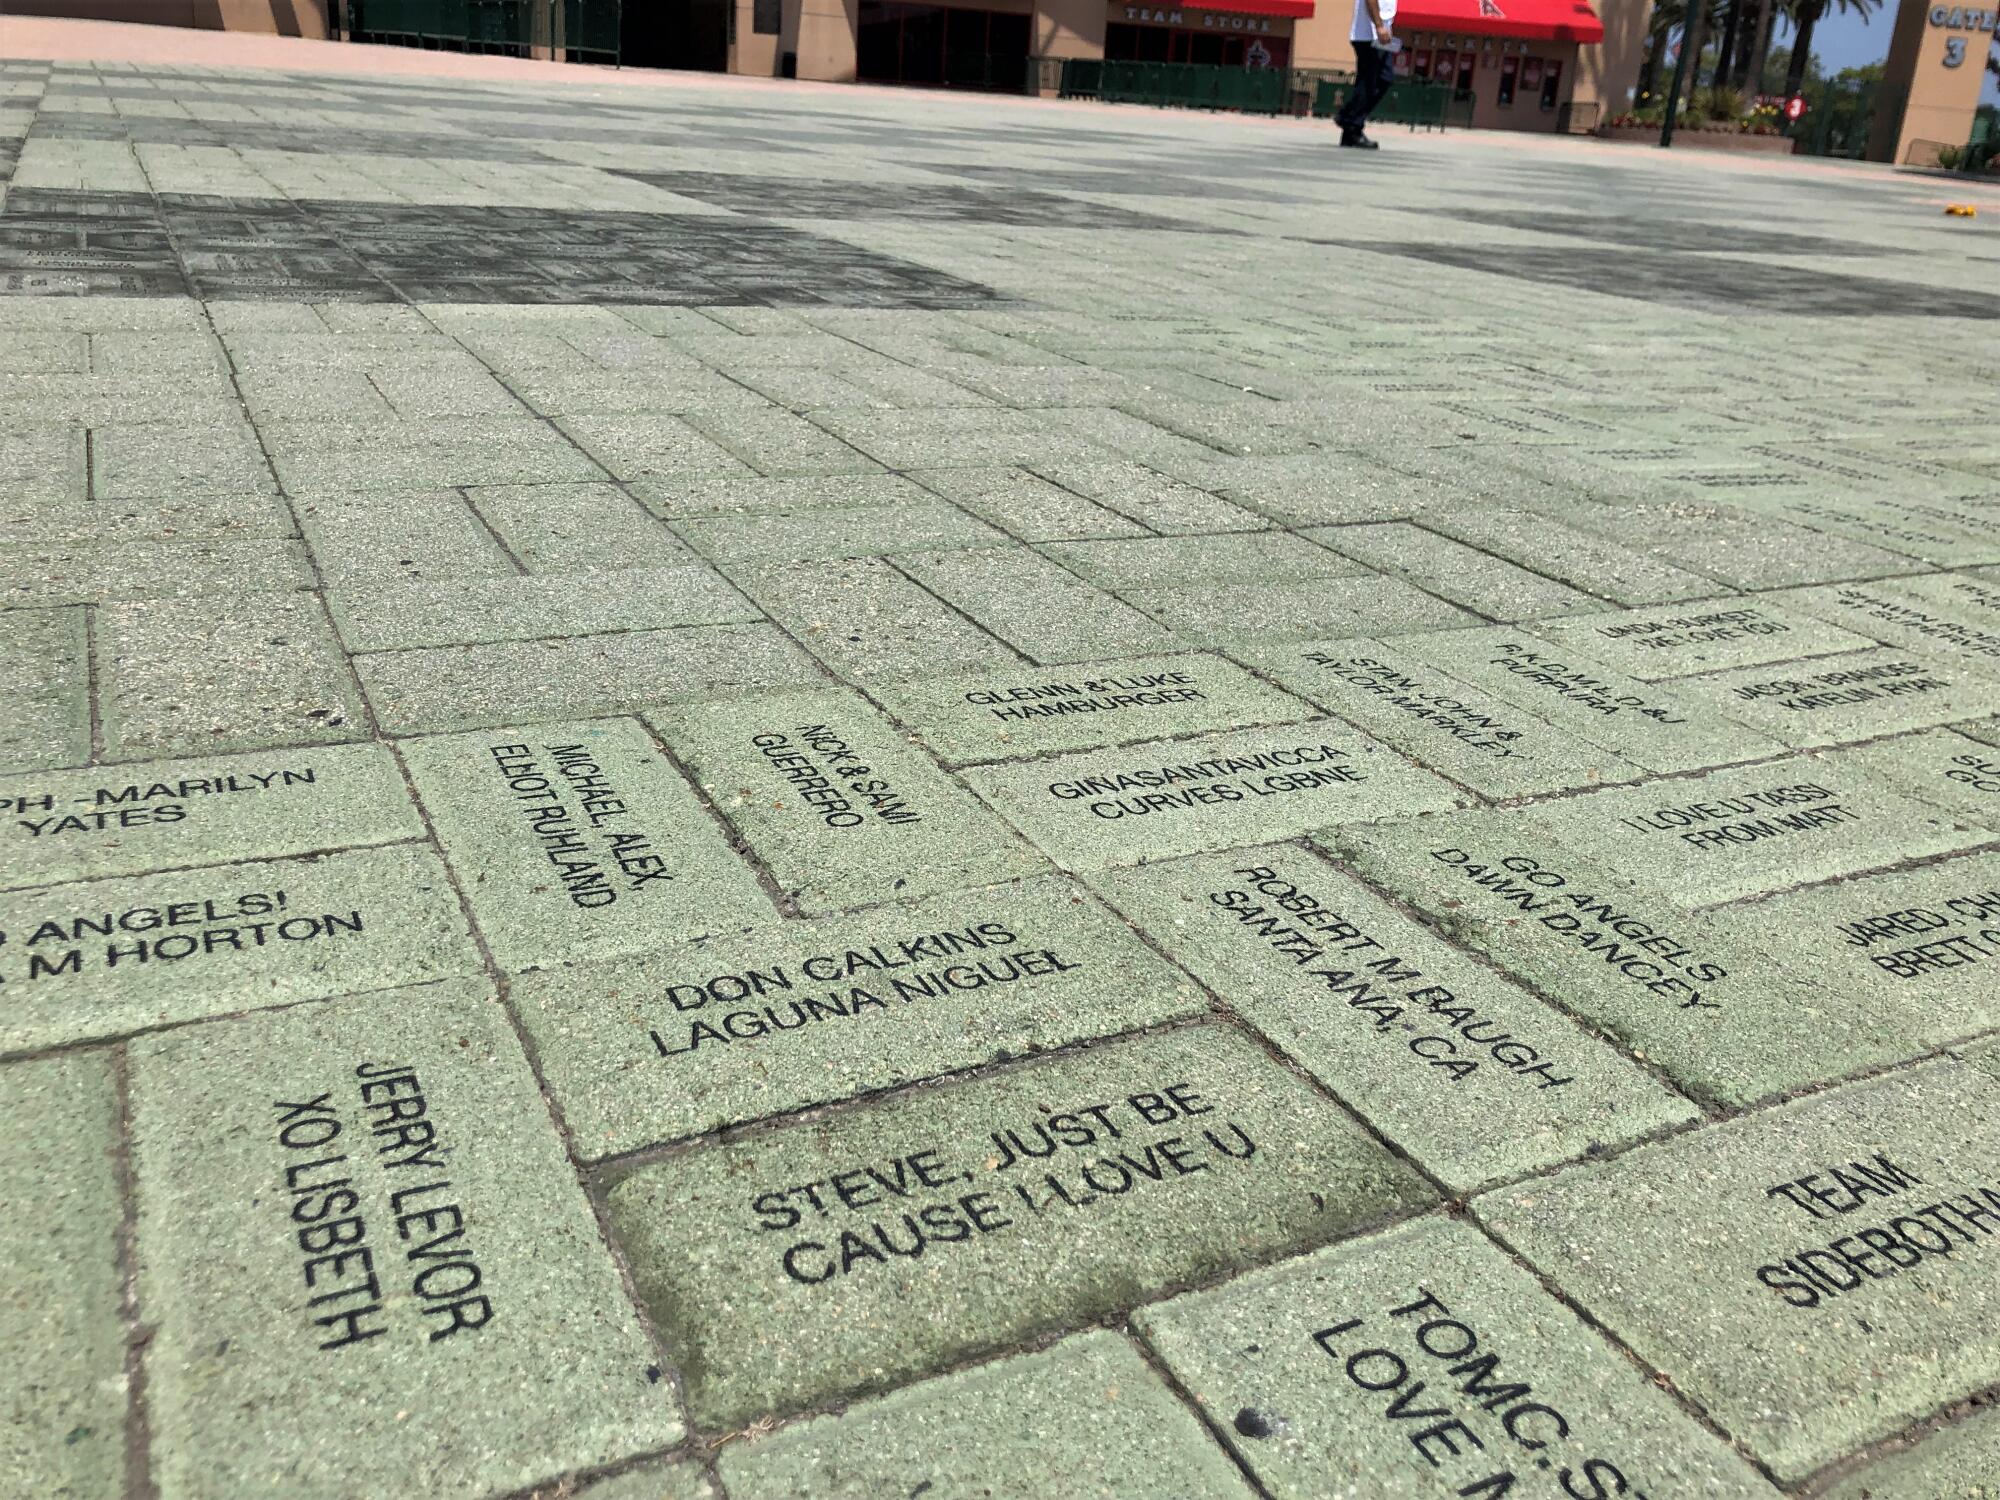 A section of bricks outside Angel Stadium's home-plate entrance.